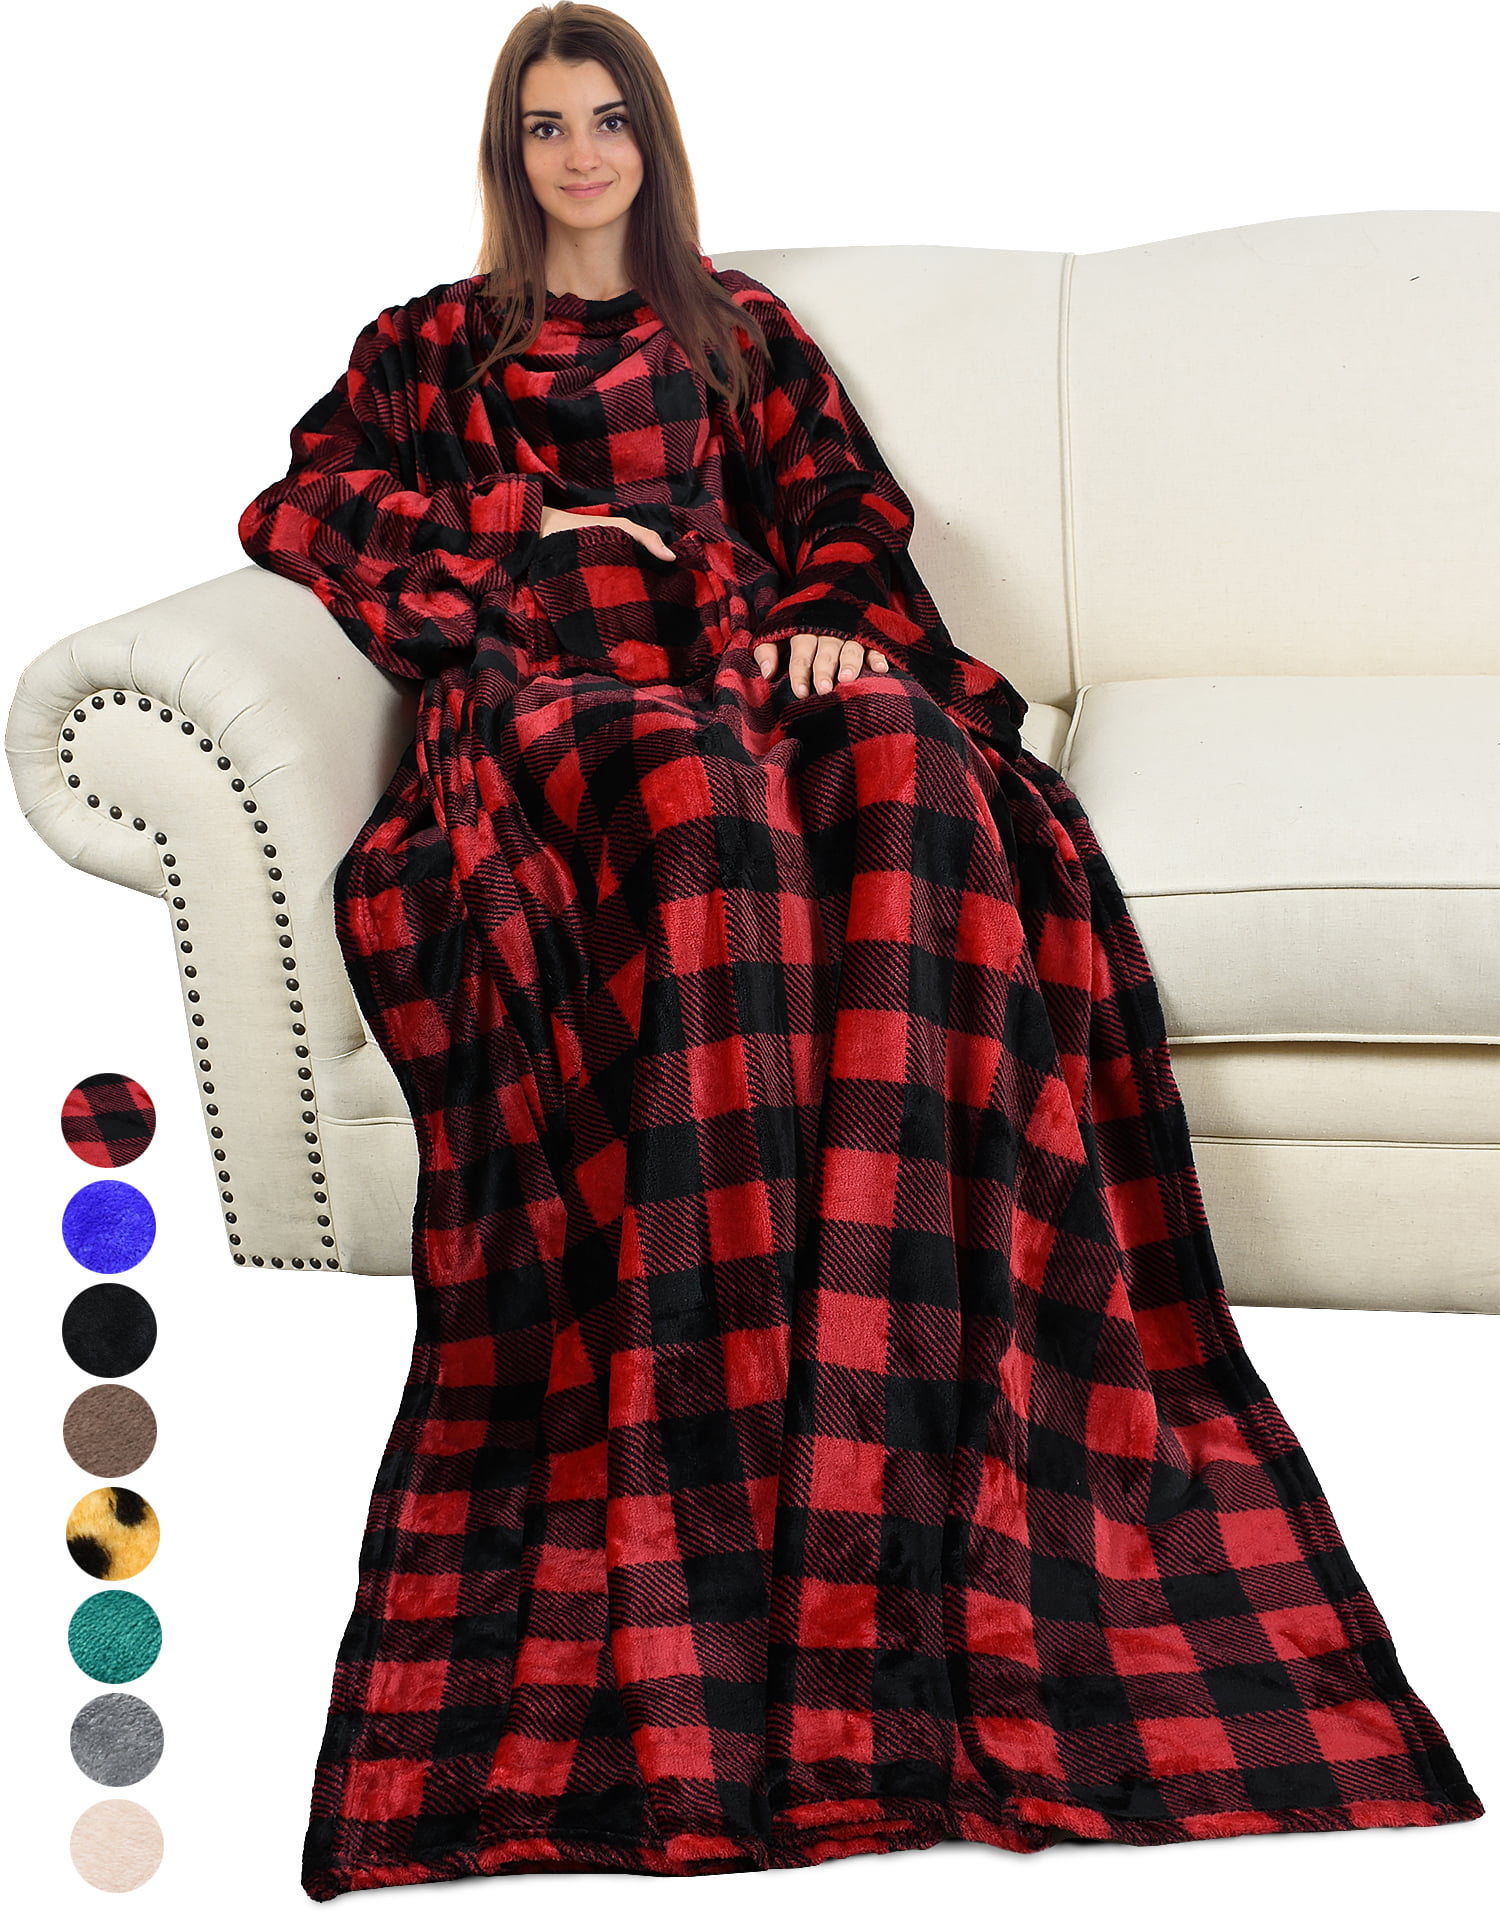 Wearable Blanket with Sleeves and Pocket,Comfy Soft Fleece Mink Micro Plush  Wrap Throws Blanket Robe for Women and Men,Red Plaid Checke Buffalo -  Walmart.com